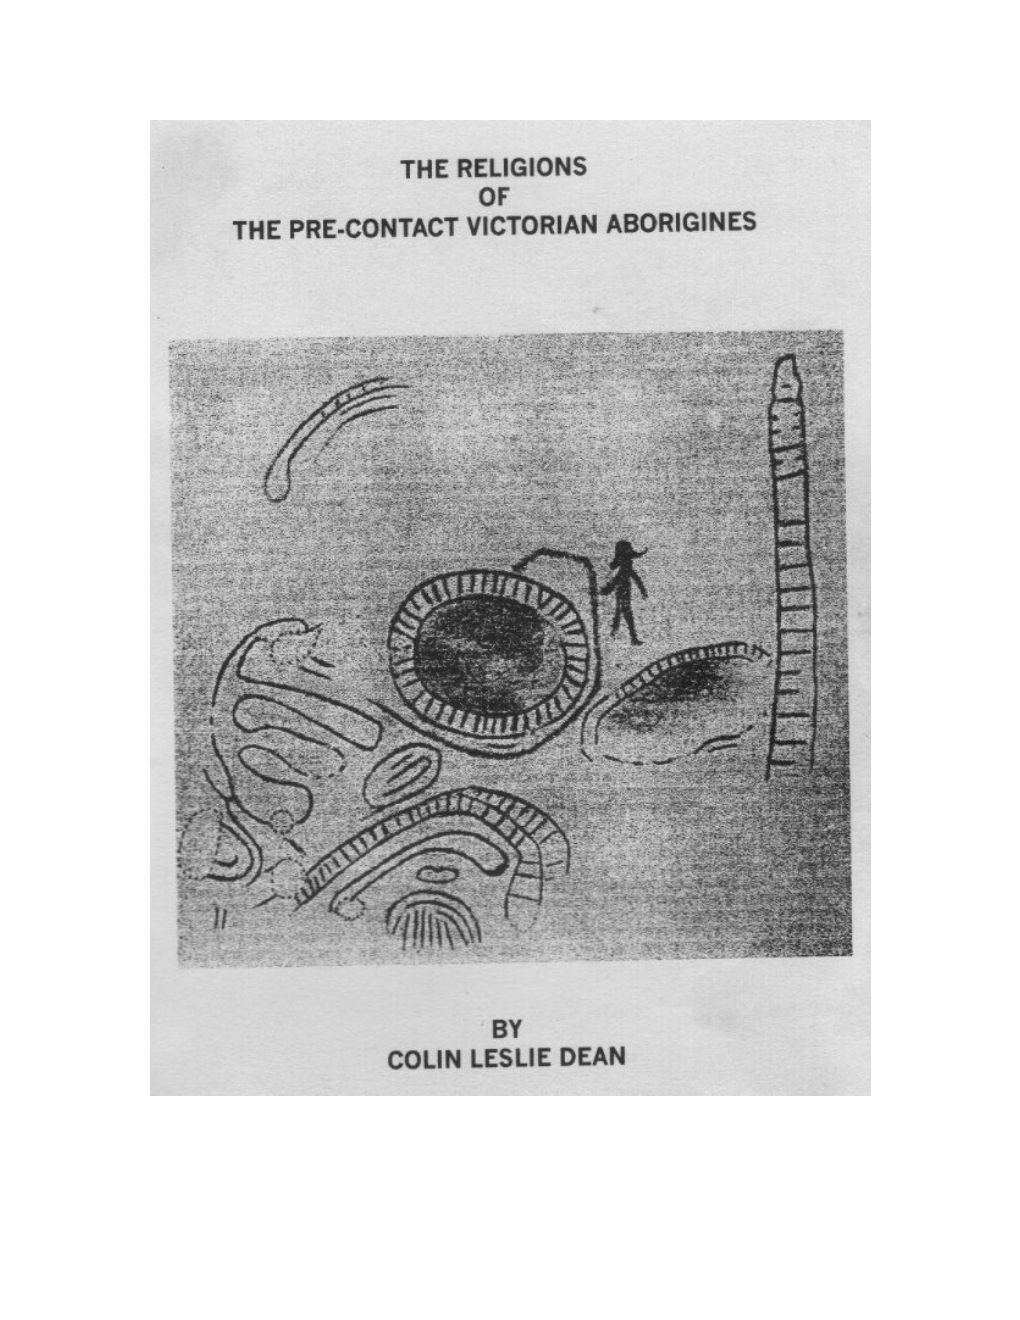 The Religions of the Pre-Contact Victorian Aborigines As It Is a Synthesis Or Compilation of the Primarily Journal Material Published in the 1800’S